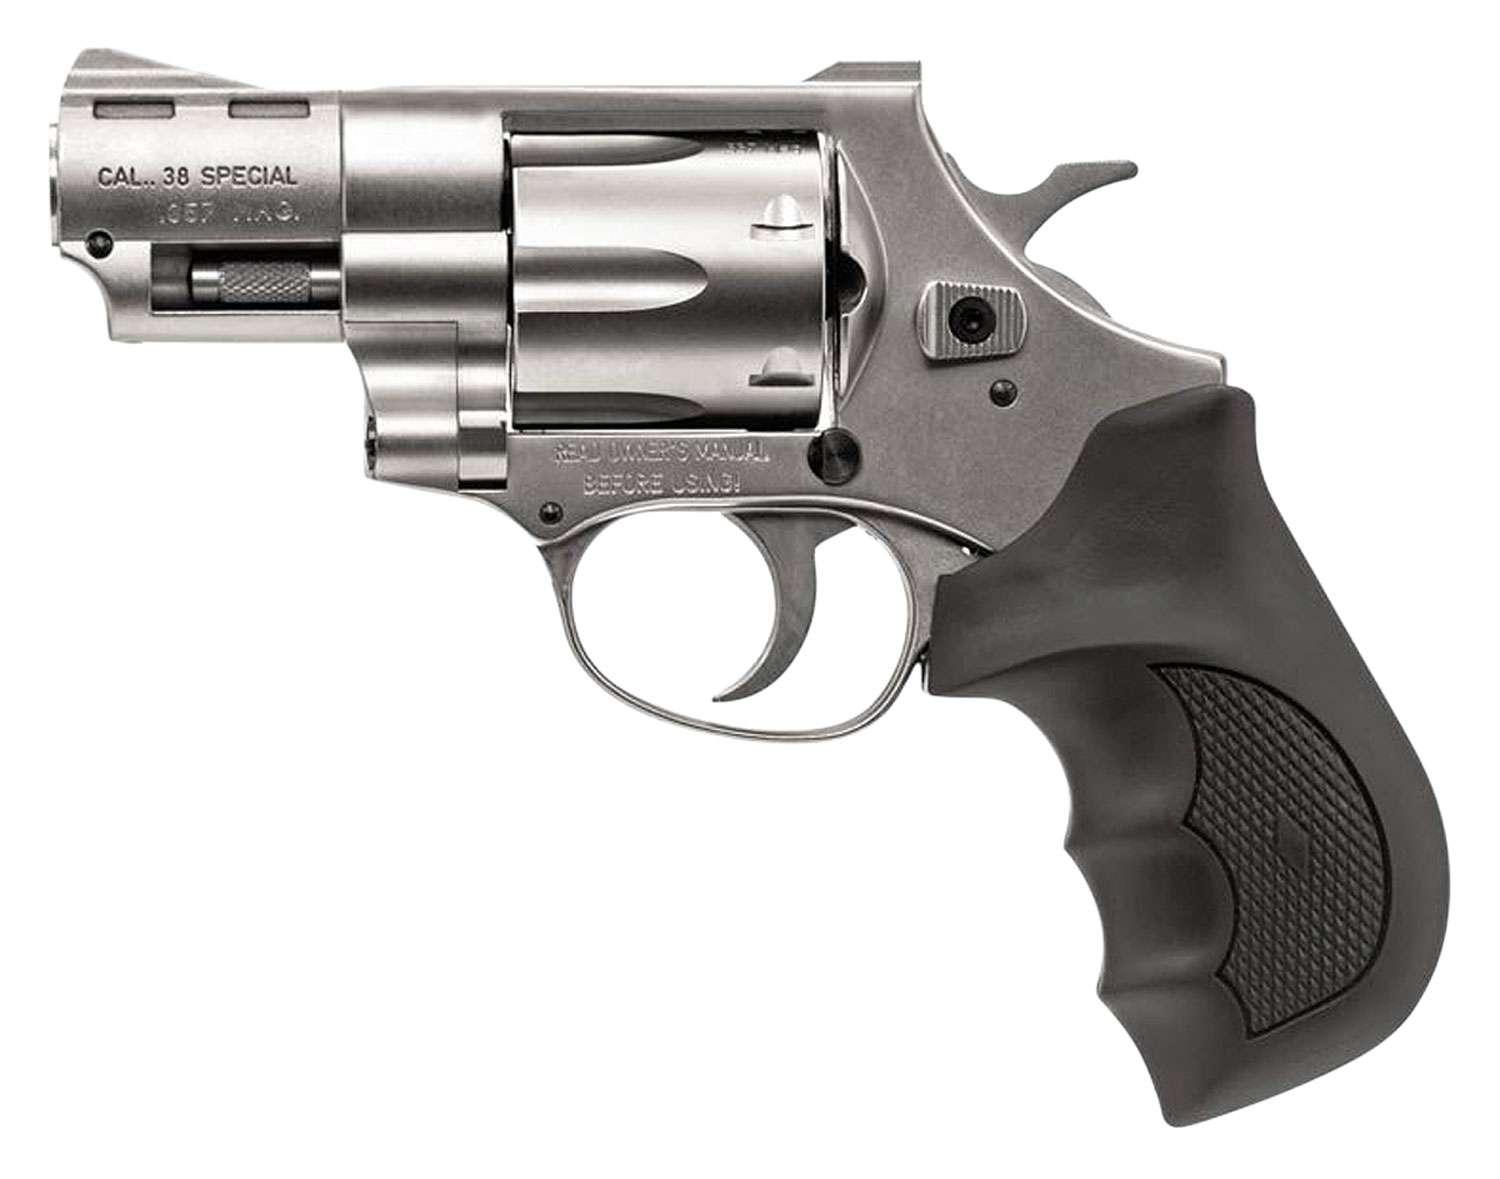 EAA Corp Windicator Nickel .357 Mag/.38 SPL 2" Barrel 6-Rounds Fixed Sights - $340.99 (E-mail Price)